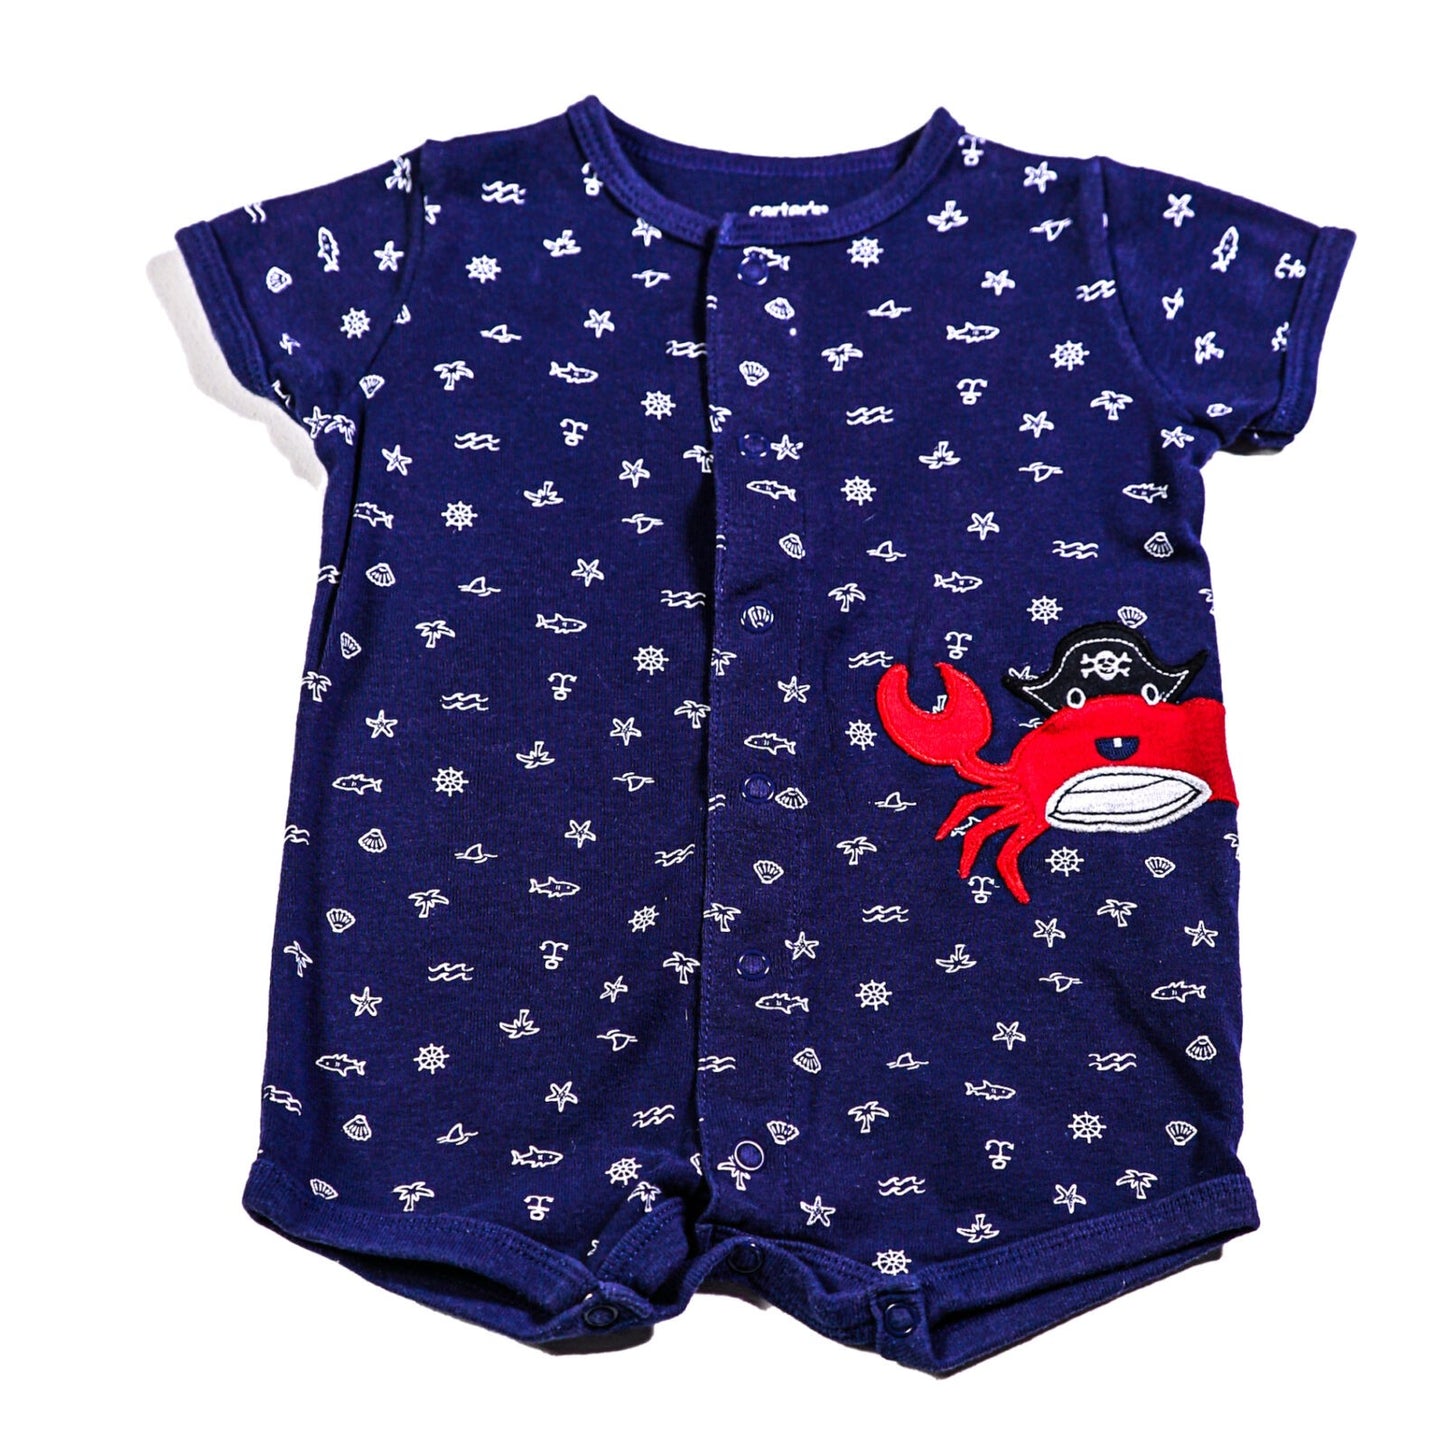 Cotton jersey sealife print rompers with appliqué crab